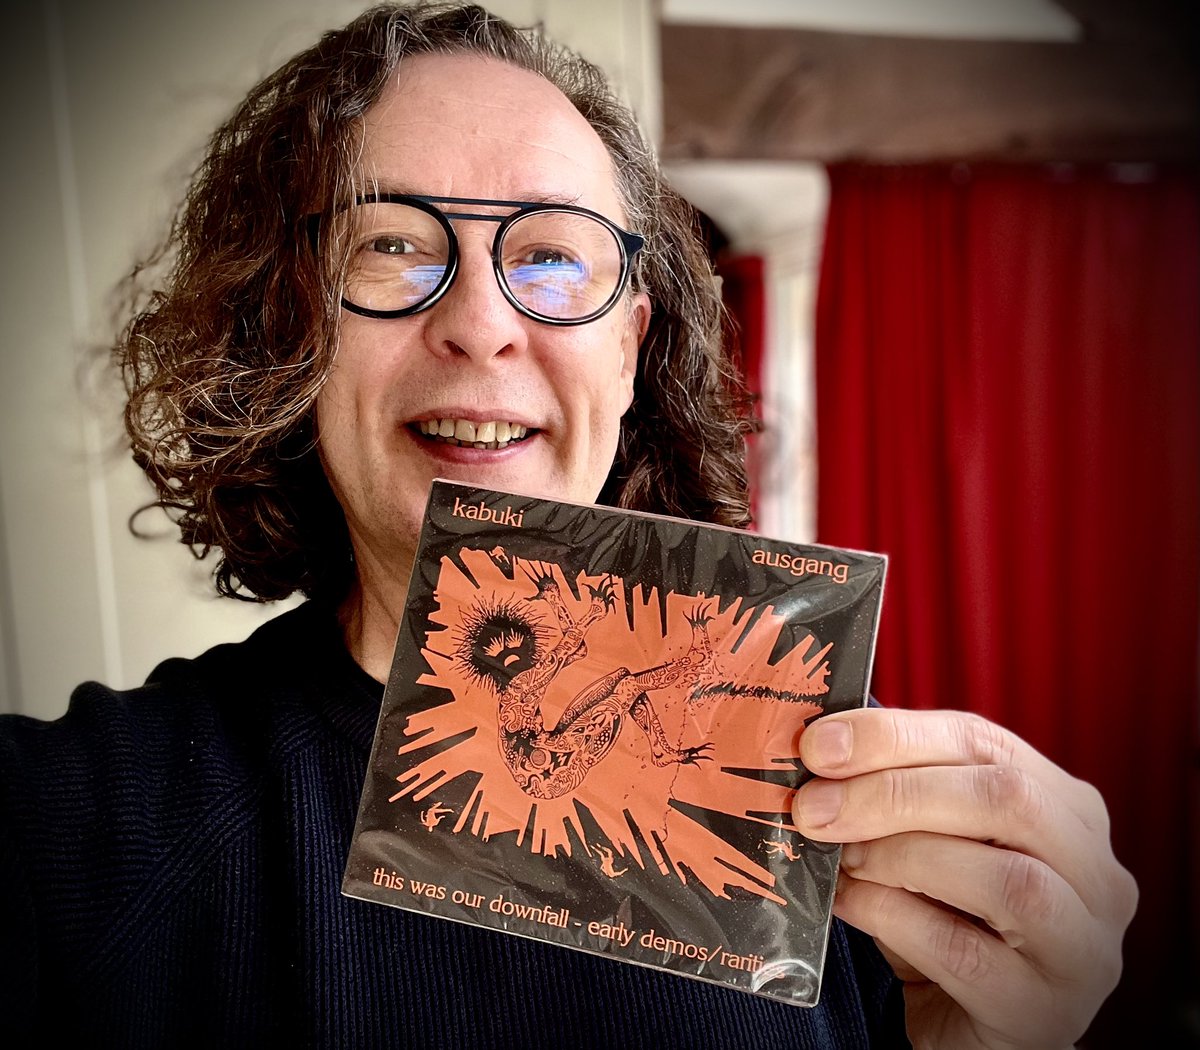 Very happy to receive this @Ausgang007 demos/rarities CD this morning. A Birmingham based band by origin and a 16/18 year old Milo was obsessed with them. They were where me and some of my mates went after punk rock: alternative, forward thinking and a thrilling live band.